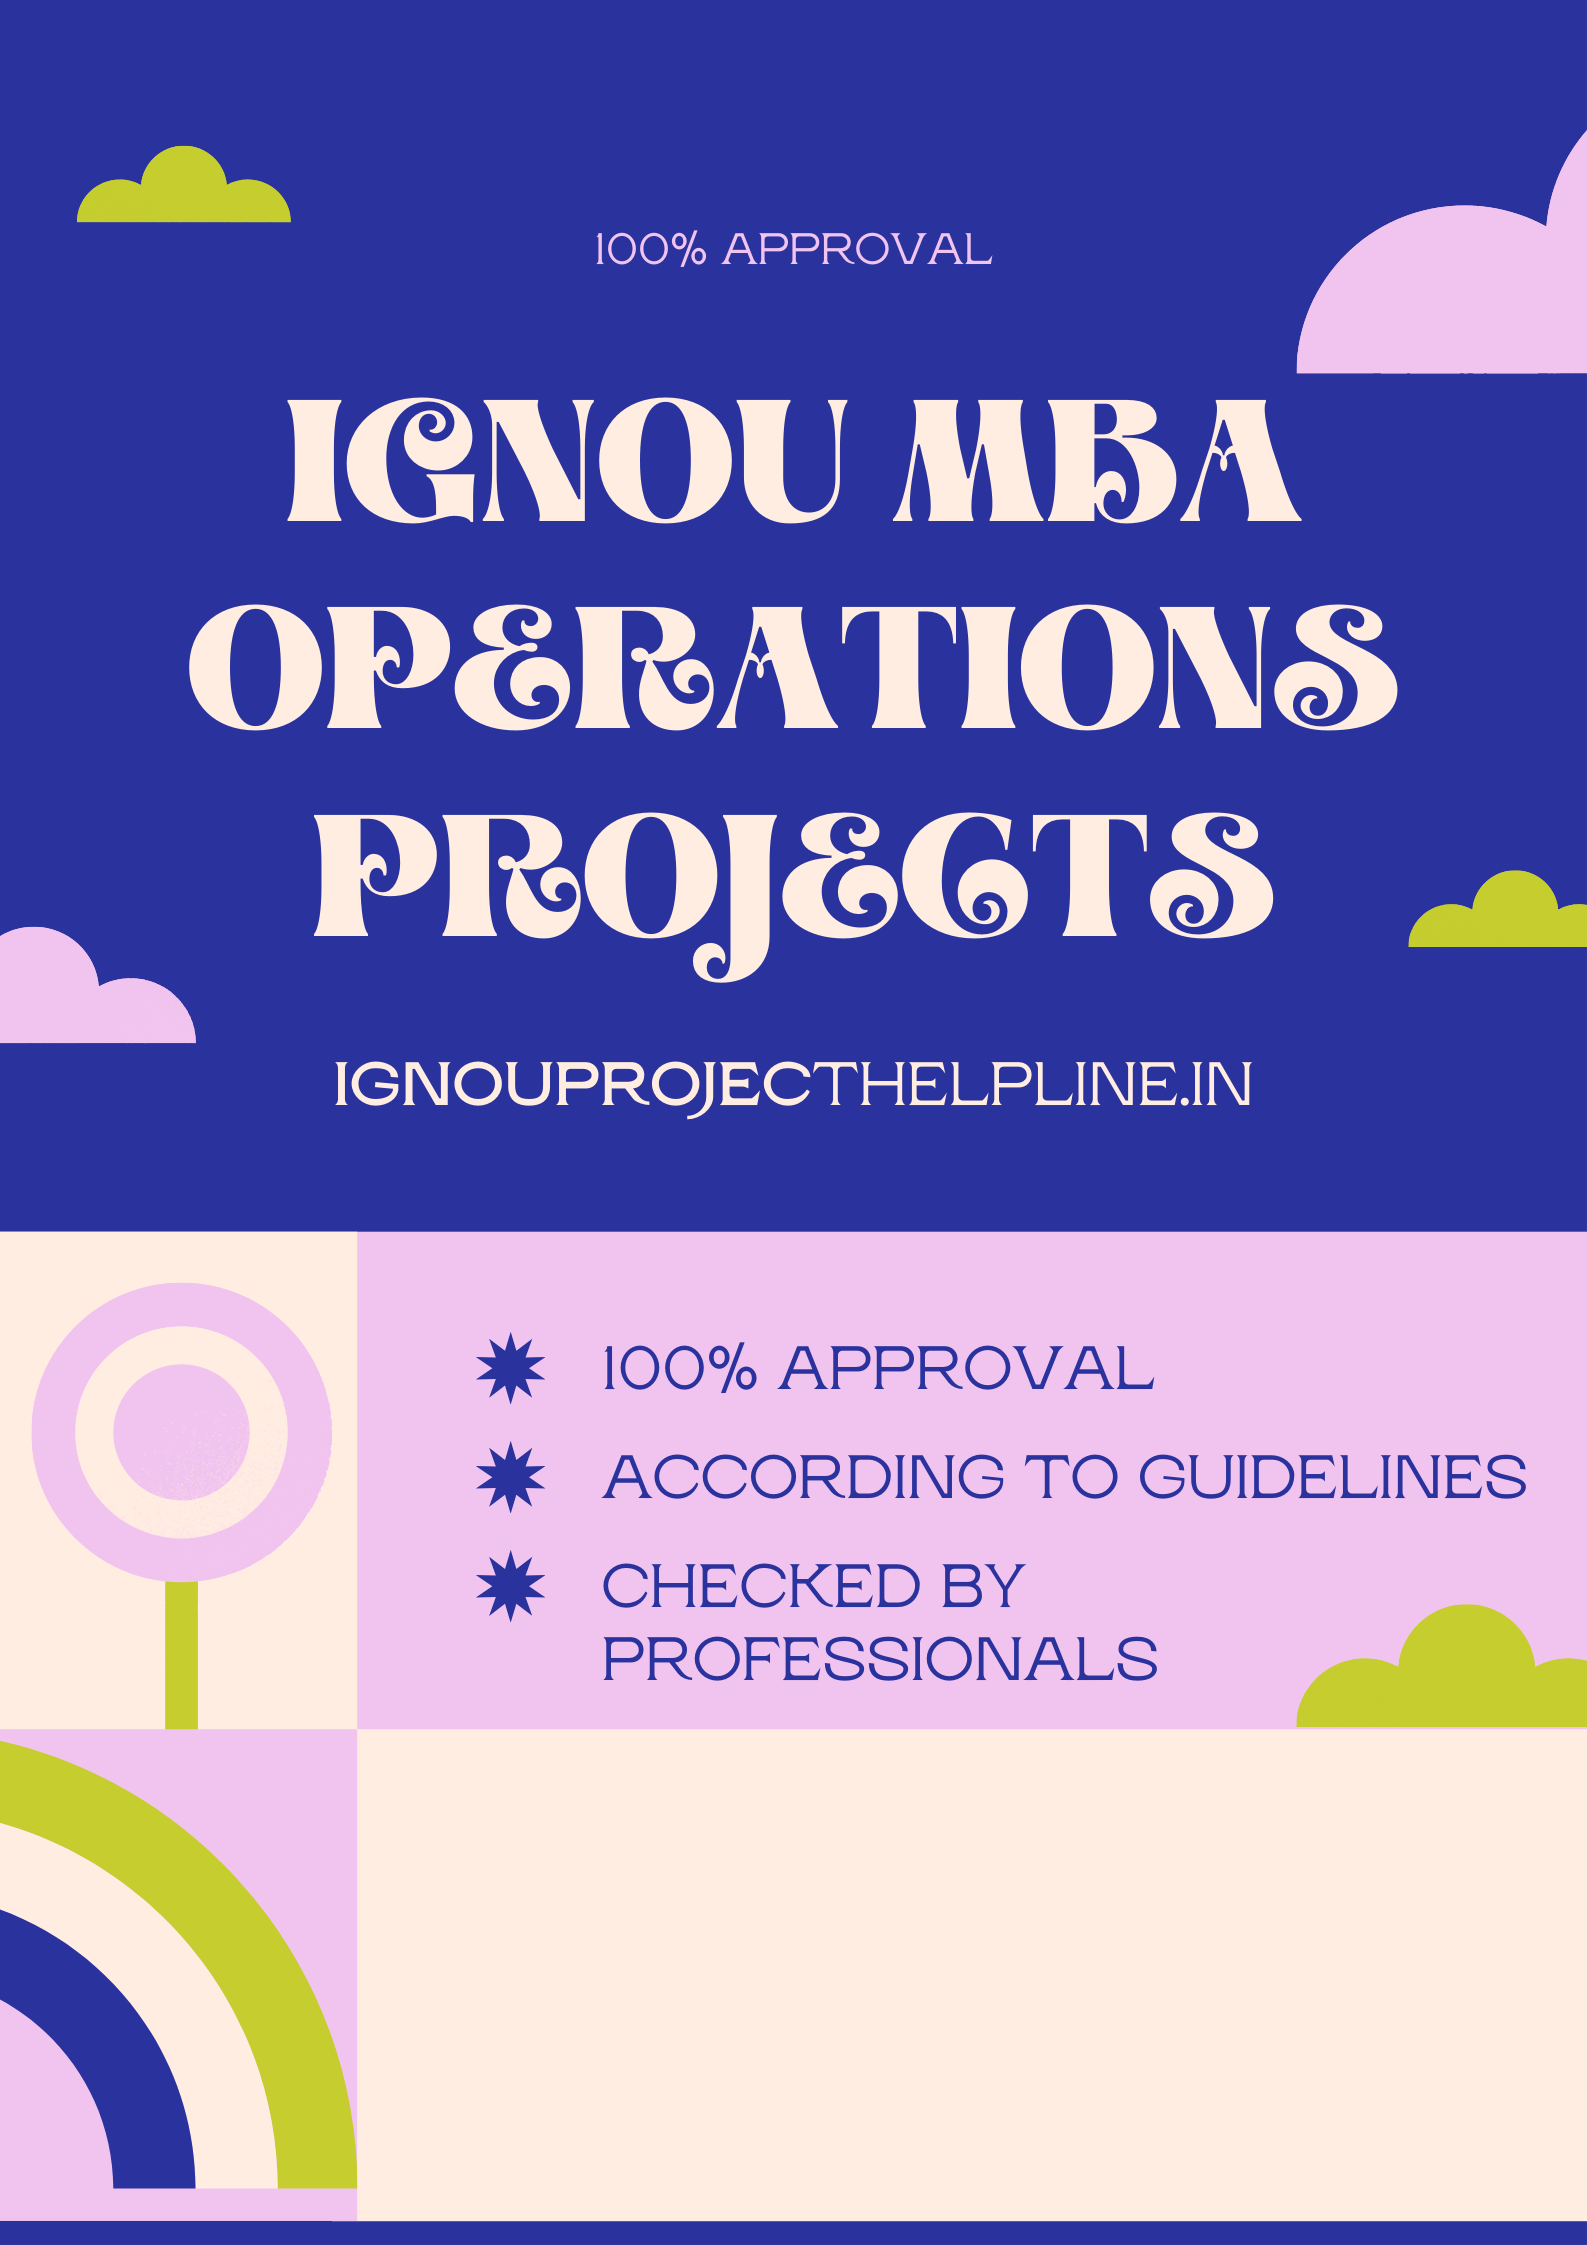 IGNOU MBA MS-100 OPERATIONS PROJECT SYNOPSIS